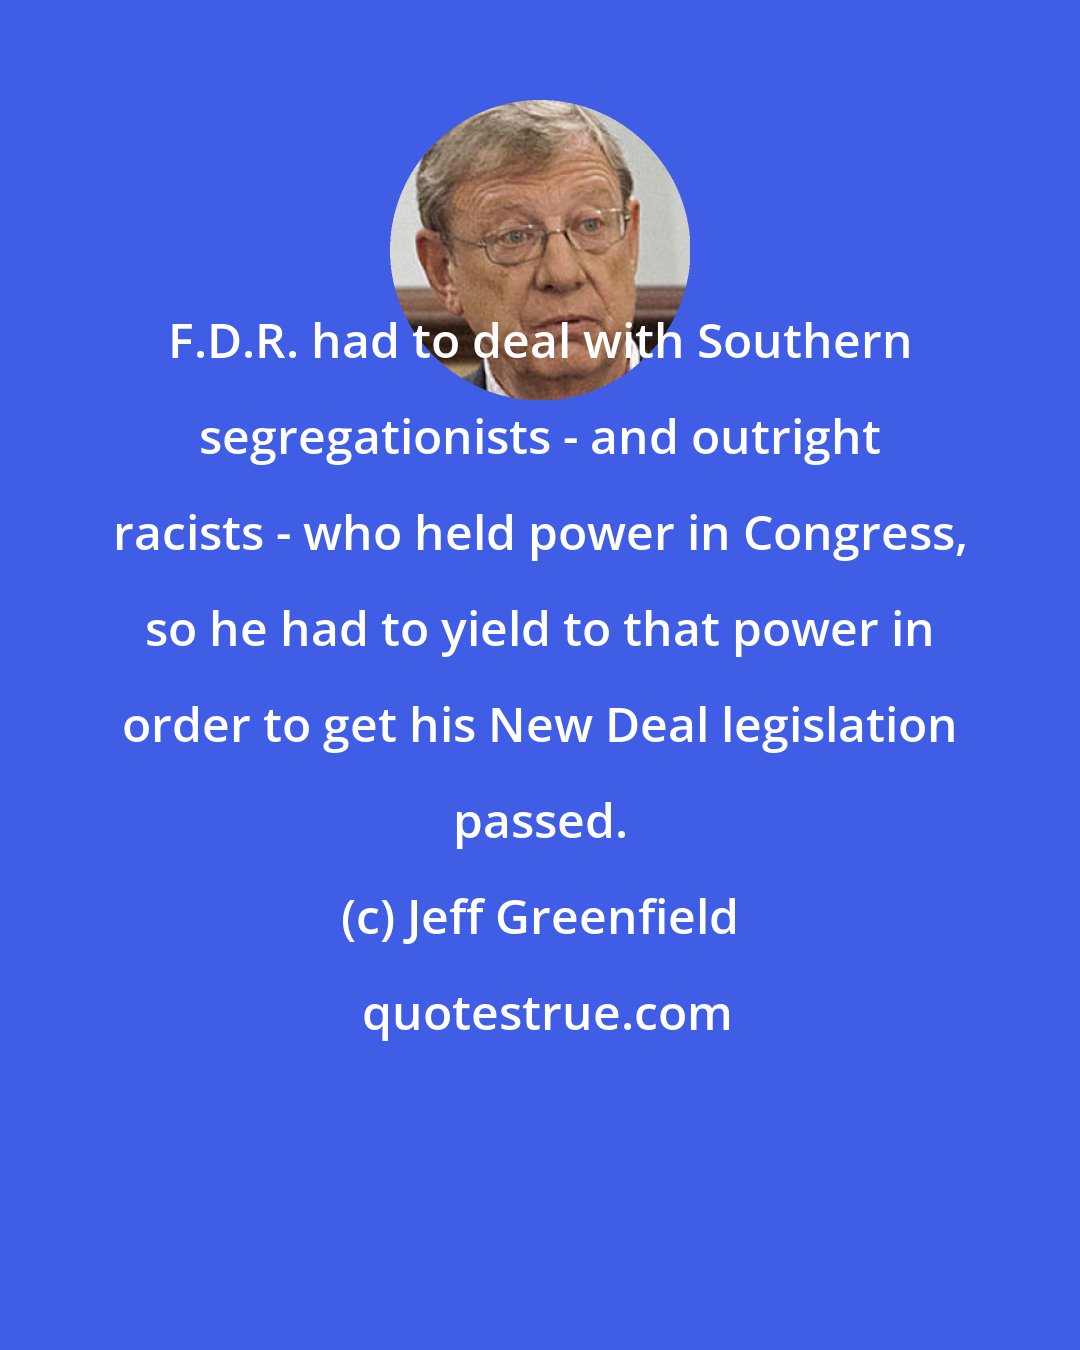 Jeff Greenfield: F.D.R. had to deal with Southern segregationists - and outright racists - who held power in Congress, so he had to yield to that power in order to get his New Deal legislation passed.